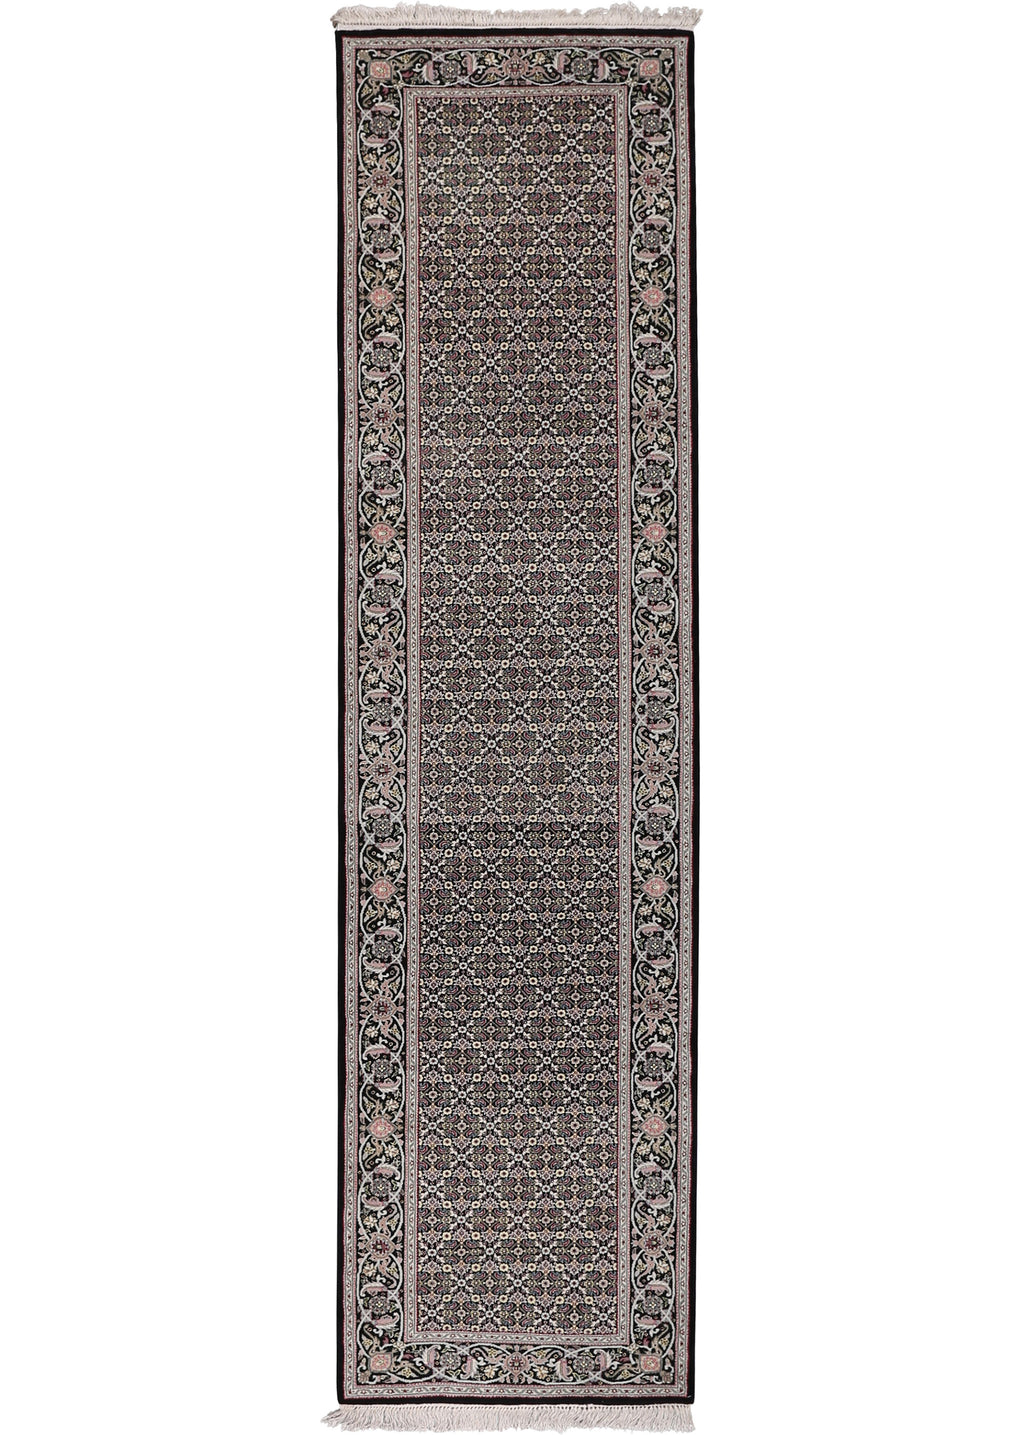 Siperso Wool Rug 2'6''x10'4''